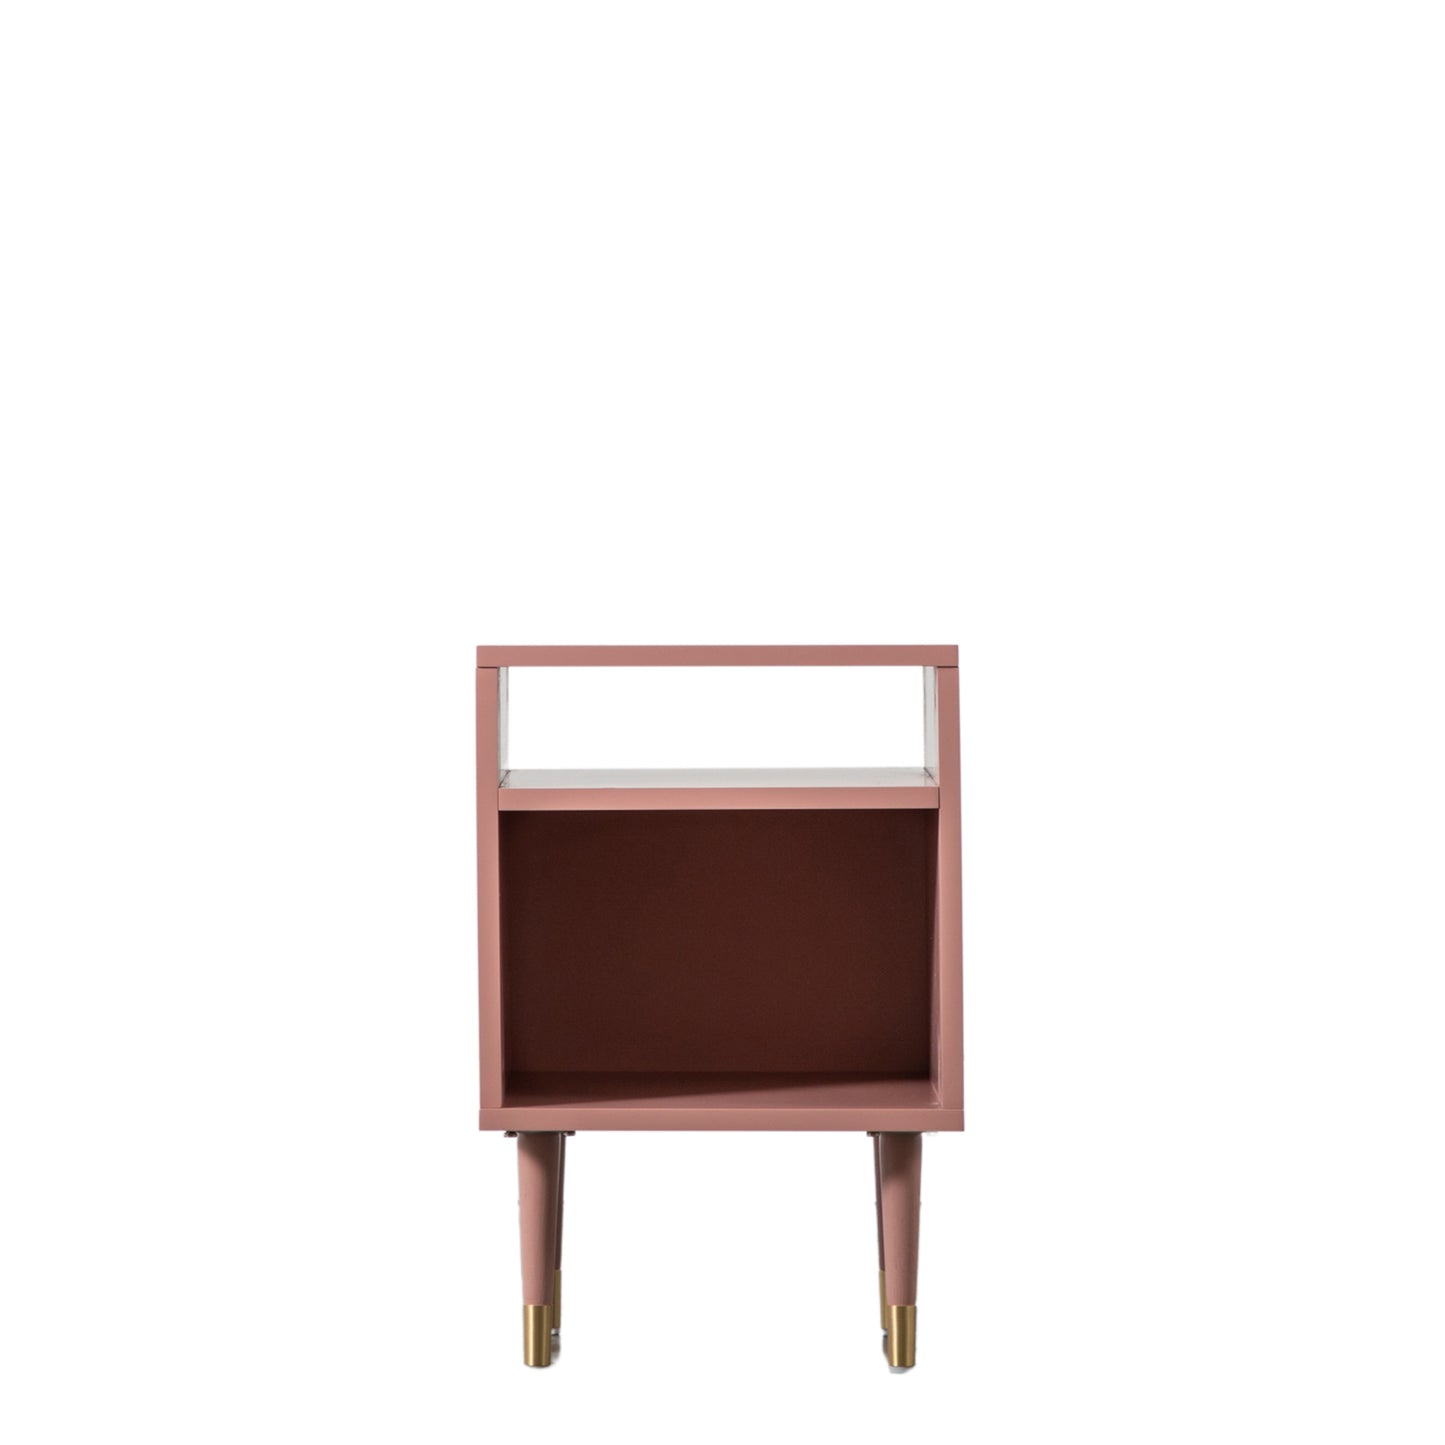 A pink Thurlestone side table with gold legs for interior decor.